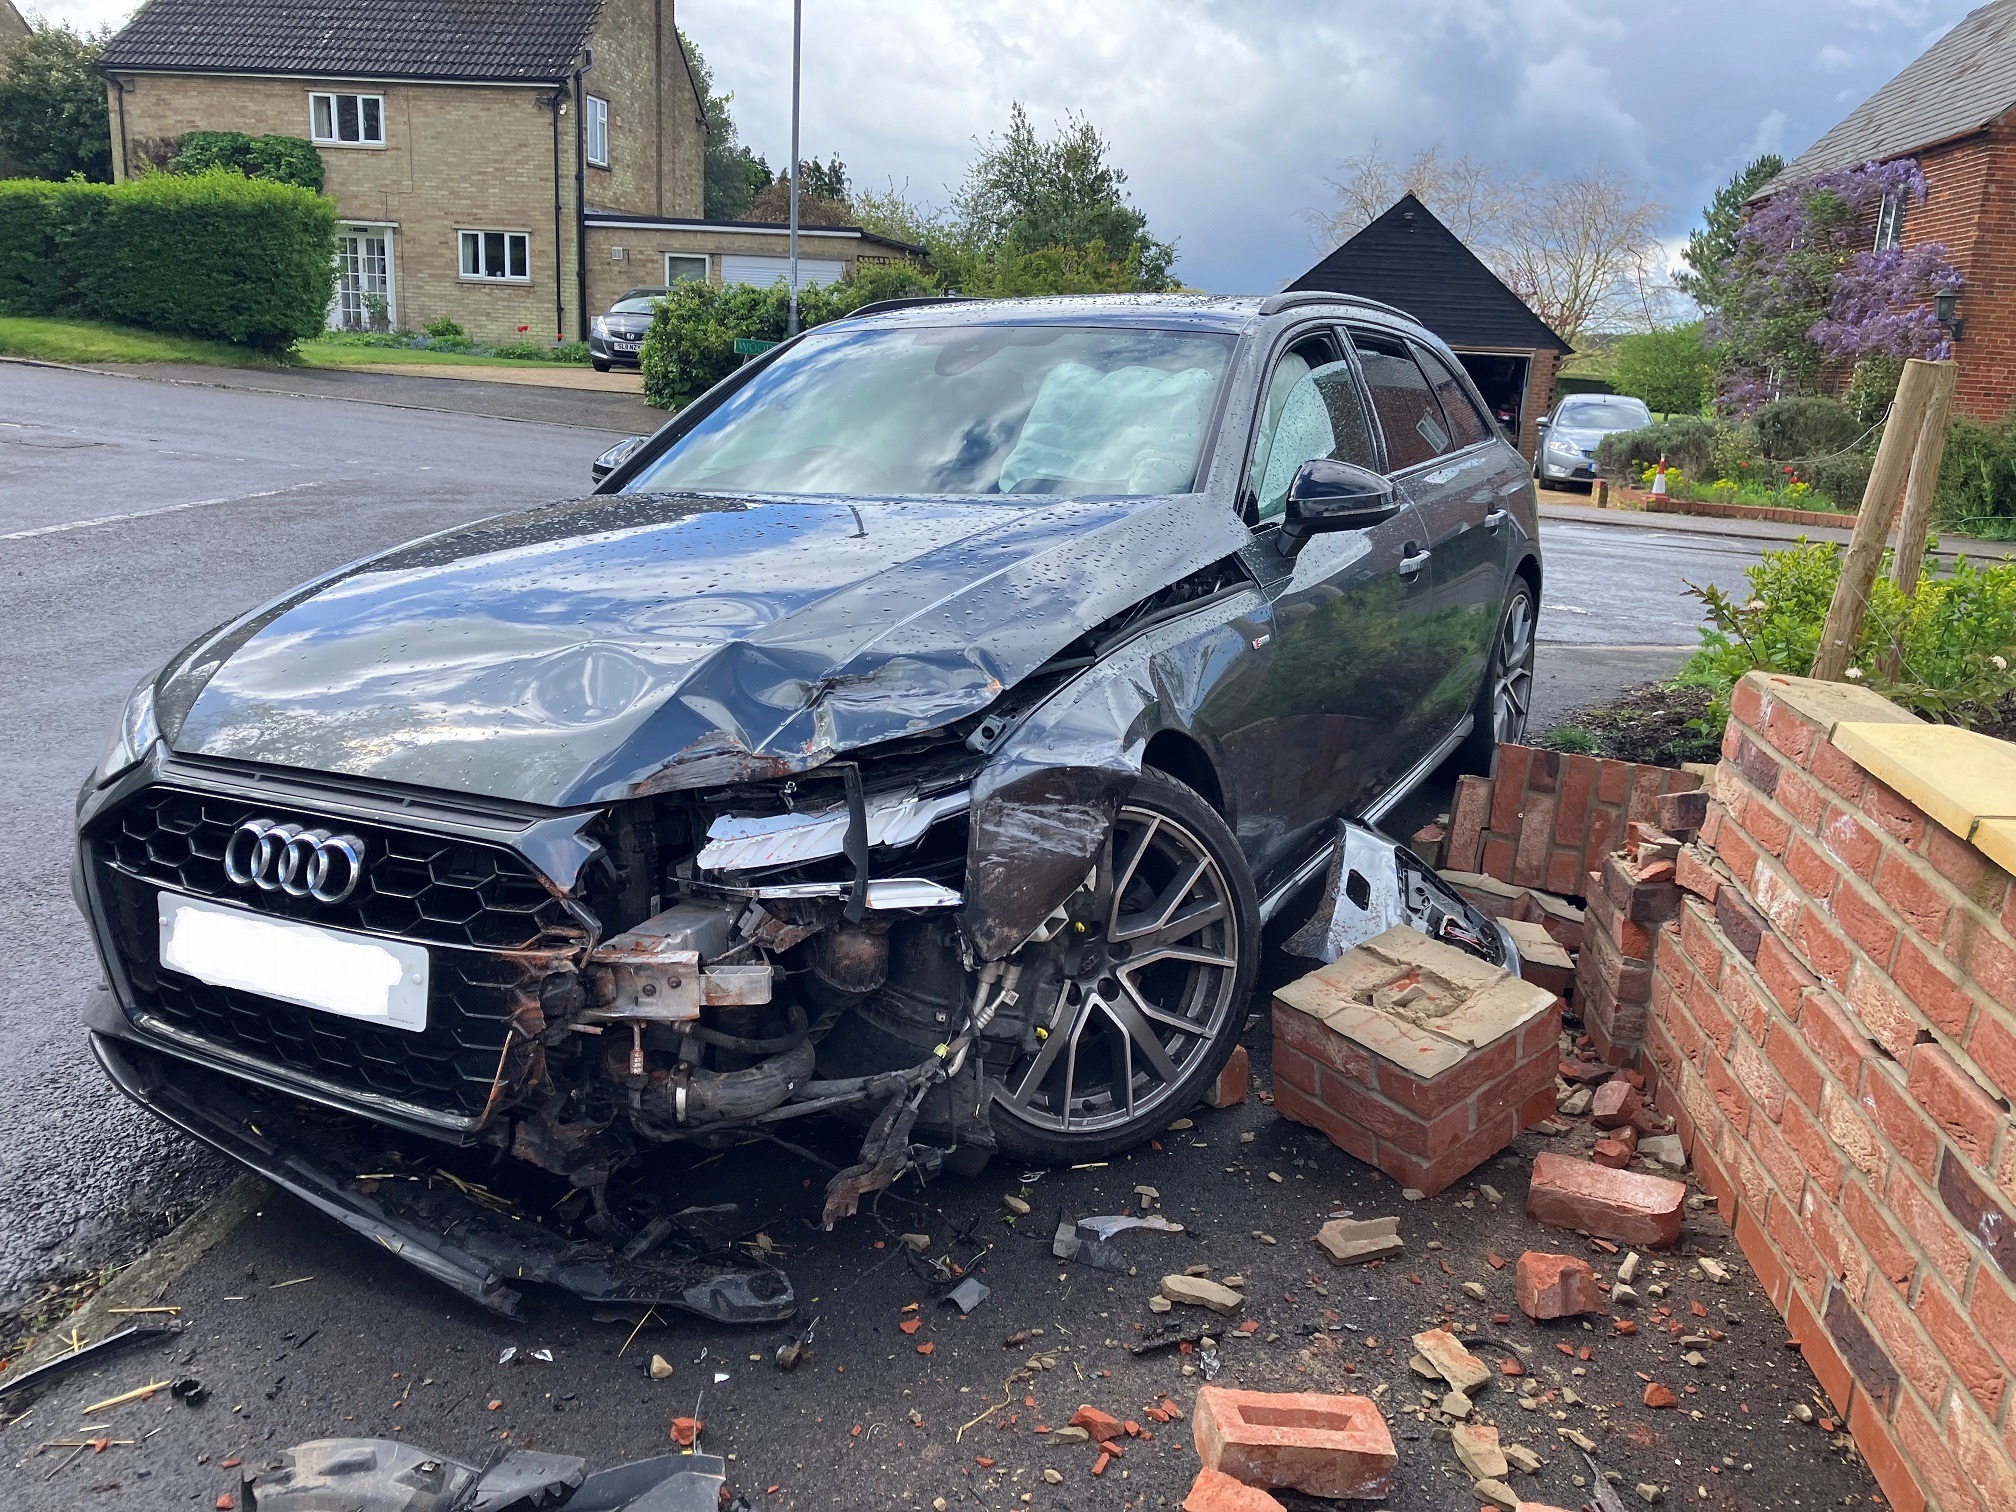 Teenage boy, 13, took this Audi from his home and crashed it into a garden wall in Crockfords Road, Newmarket, on Monday morning.